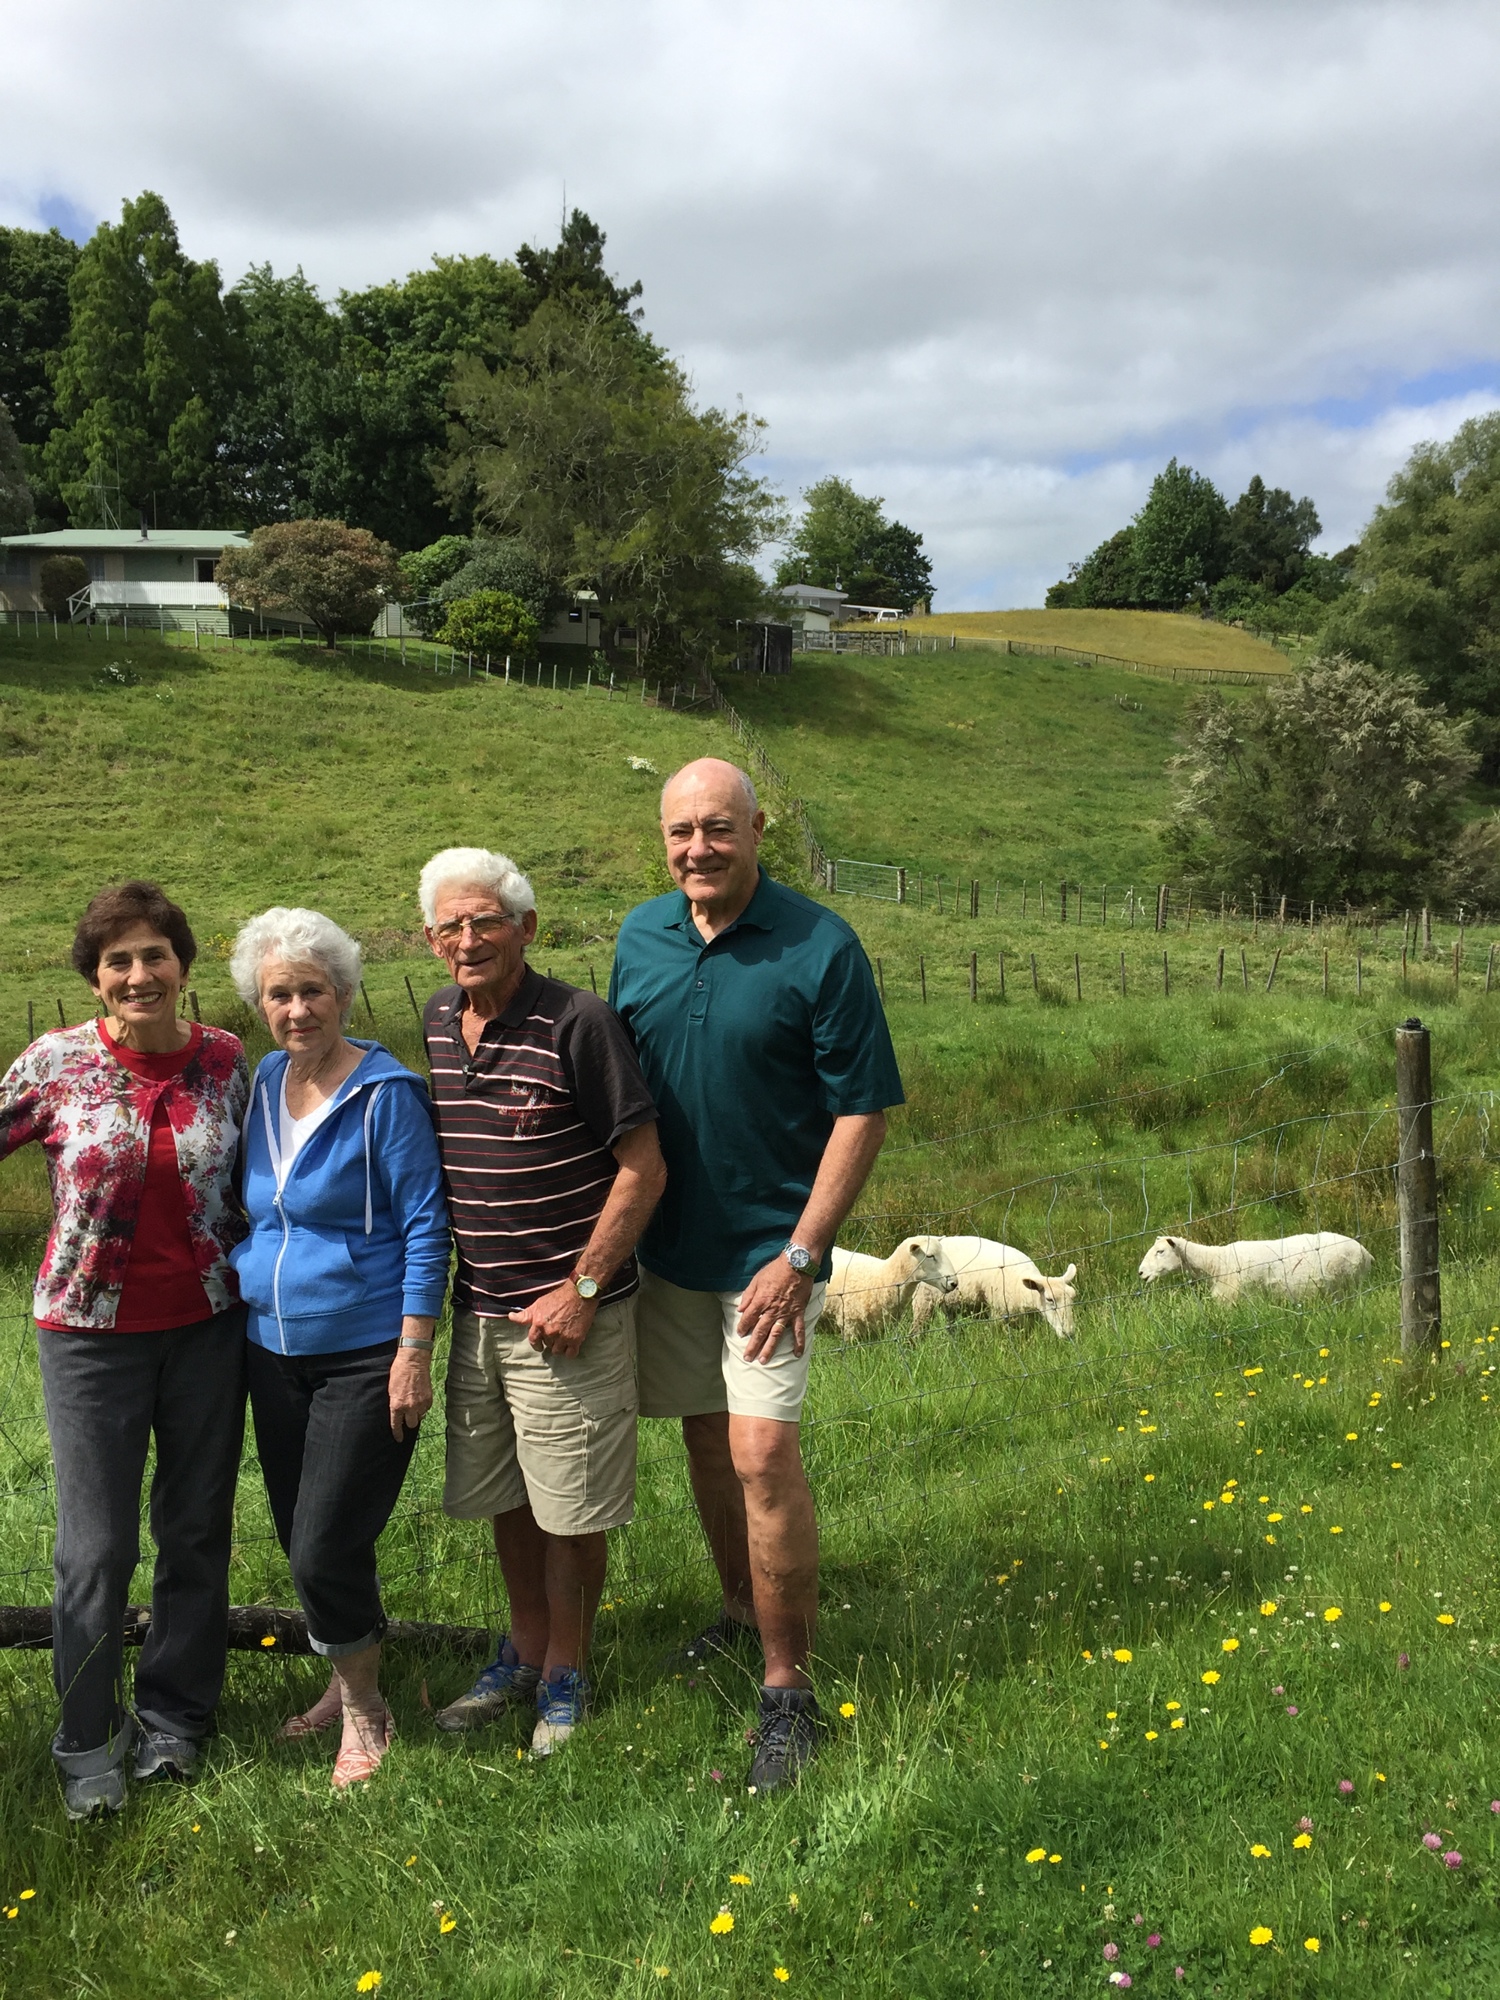 Karen Brown, left, and her pen pal, Robyn Chrystal, started writing letters to each other in 1951. They and their husbands, Laurie Chrystal, center, and Art Brown, tour the Chrystals' sheep farm in New Zealand.